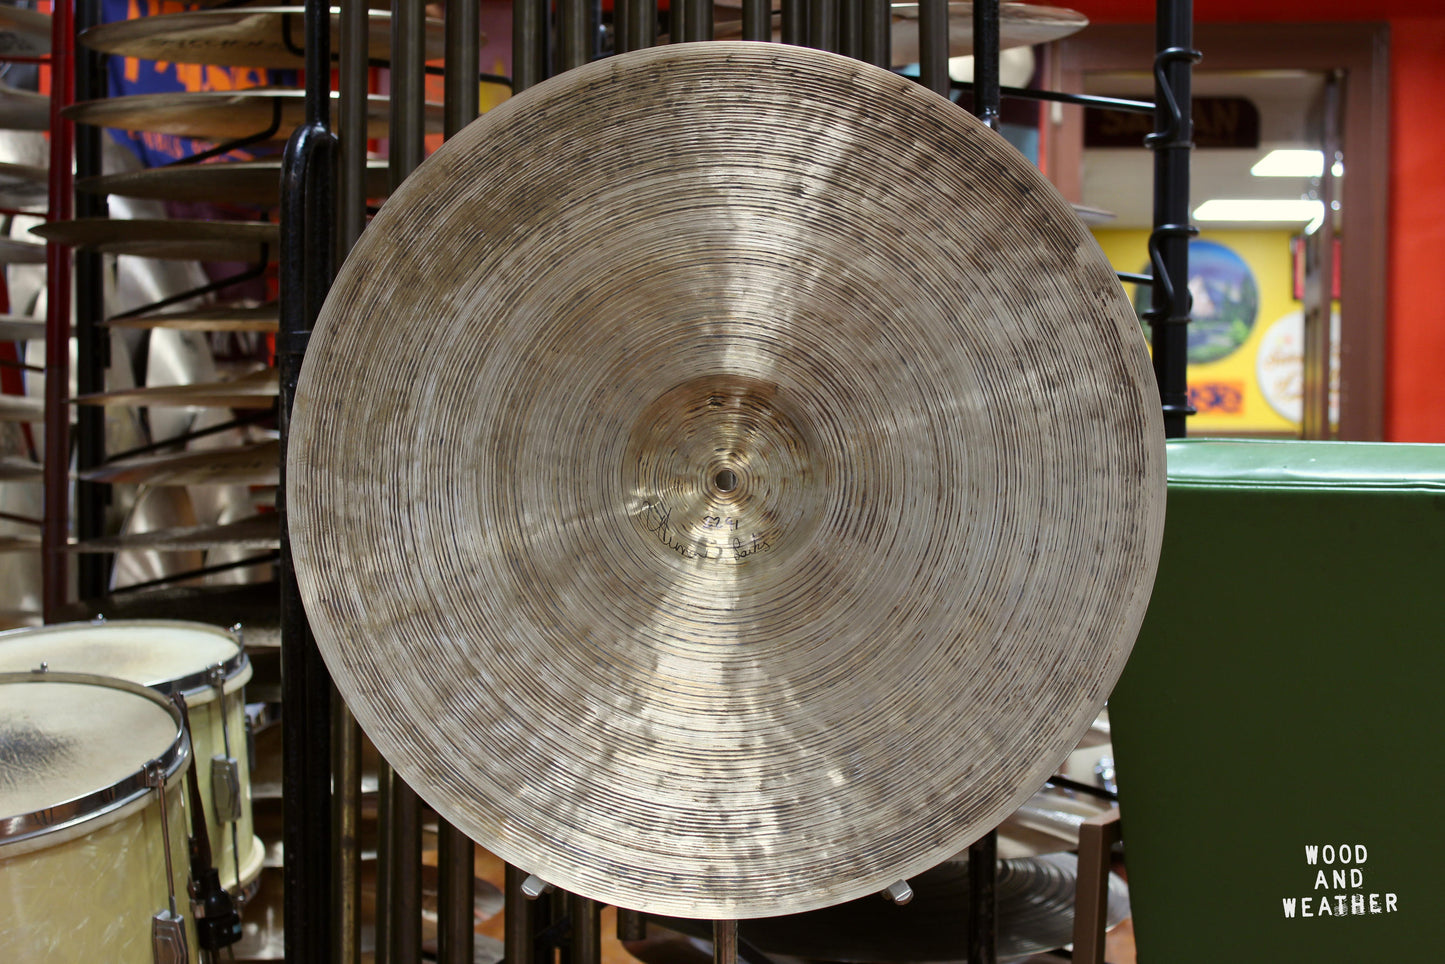 Used Istanbul Agop 22" 30th Anniversary Ride Cymbal 2291g